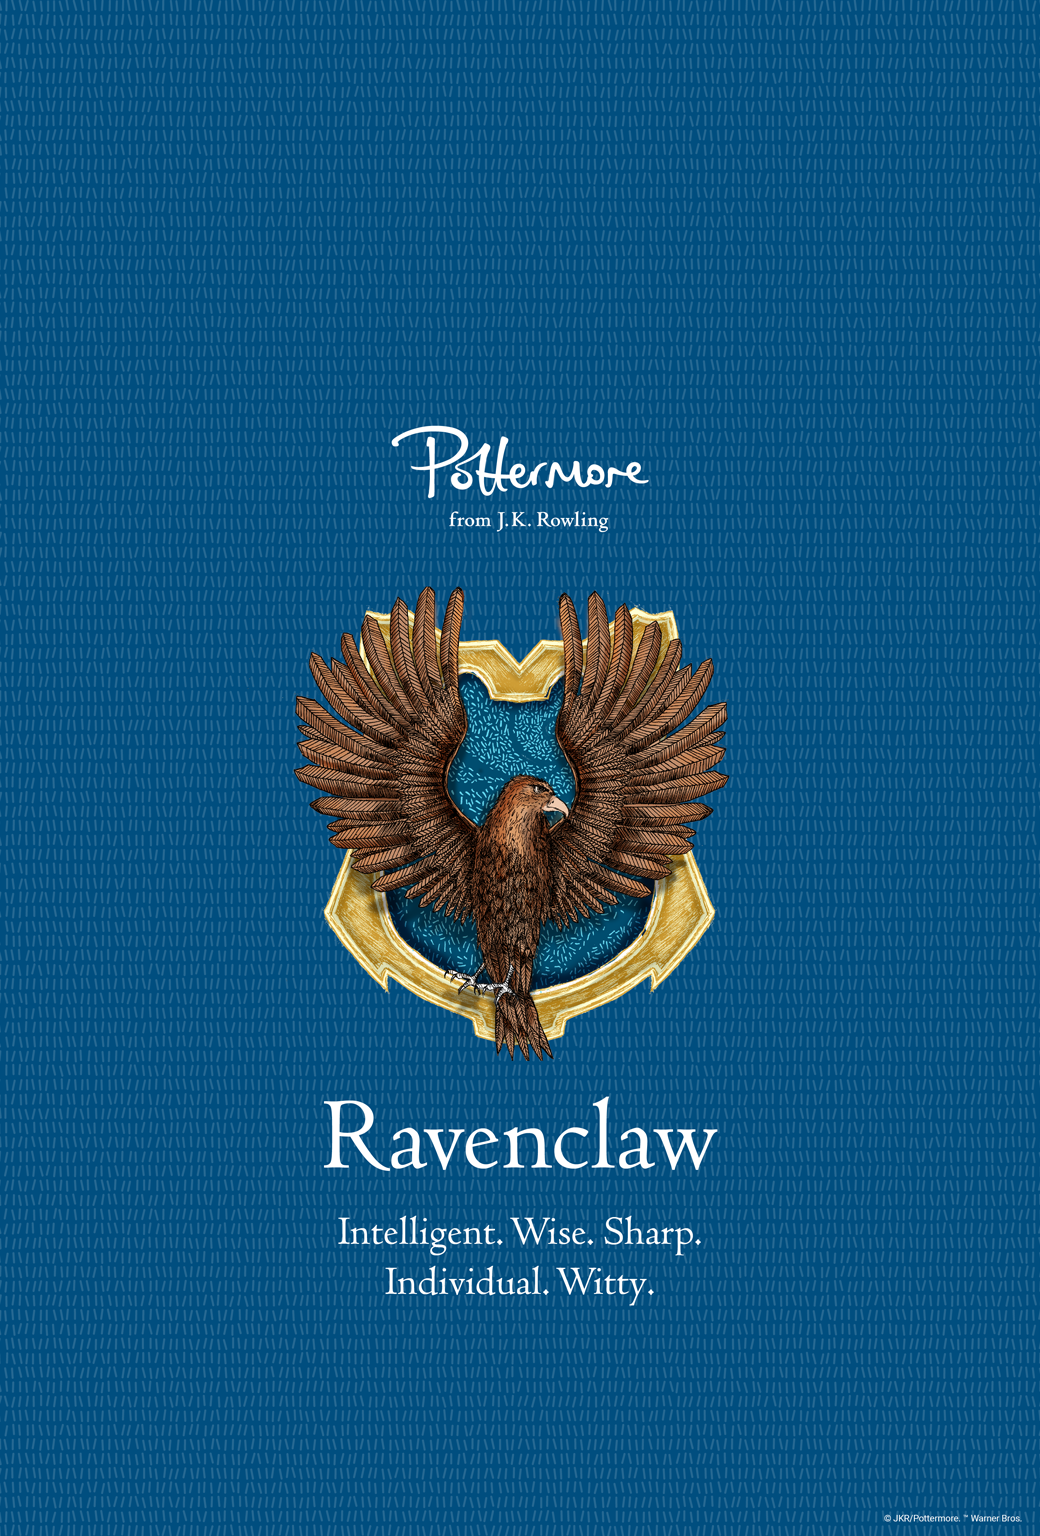 Ravenclaw iphone wallpaper  Harry potter ravenclaw Ravenclaw Harry potter